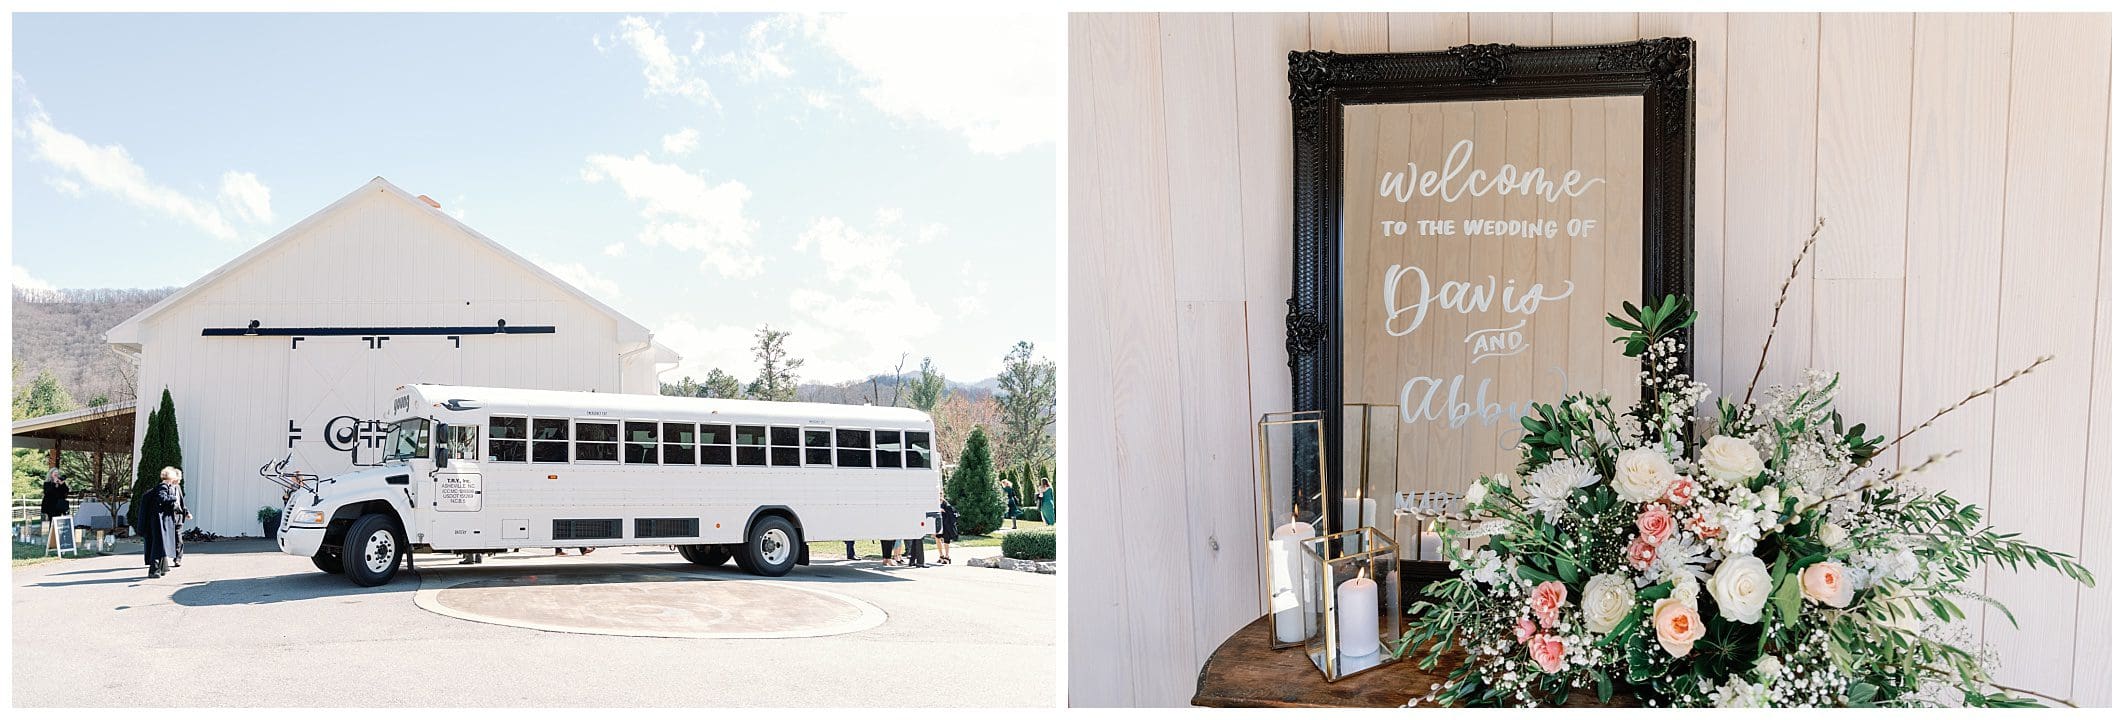 A wedding with a white bus in front of a barn.